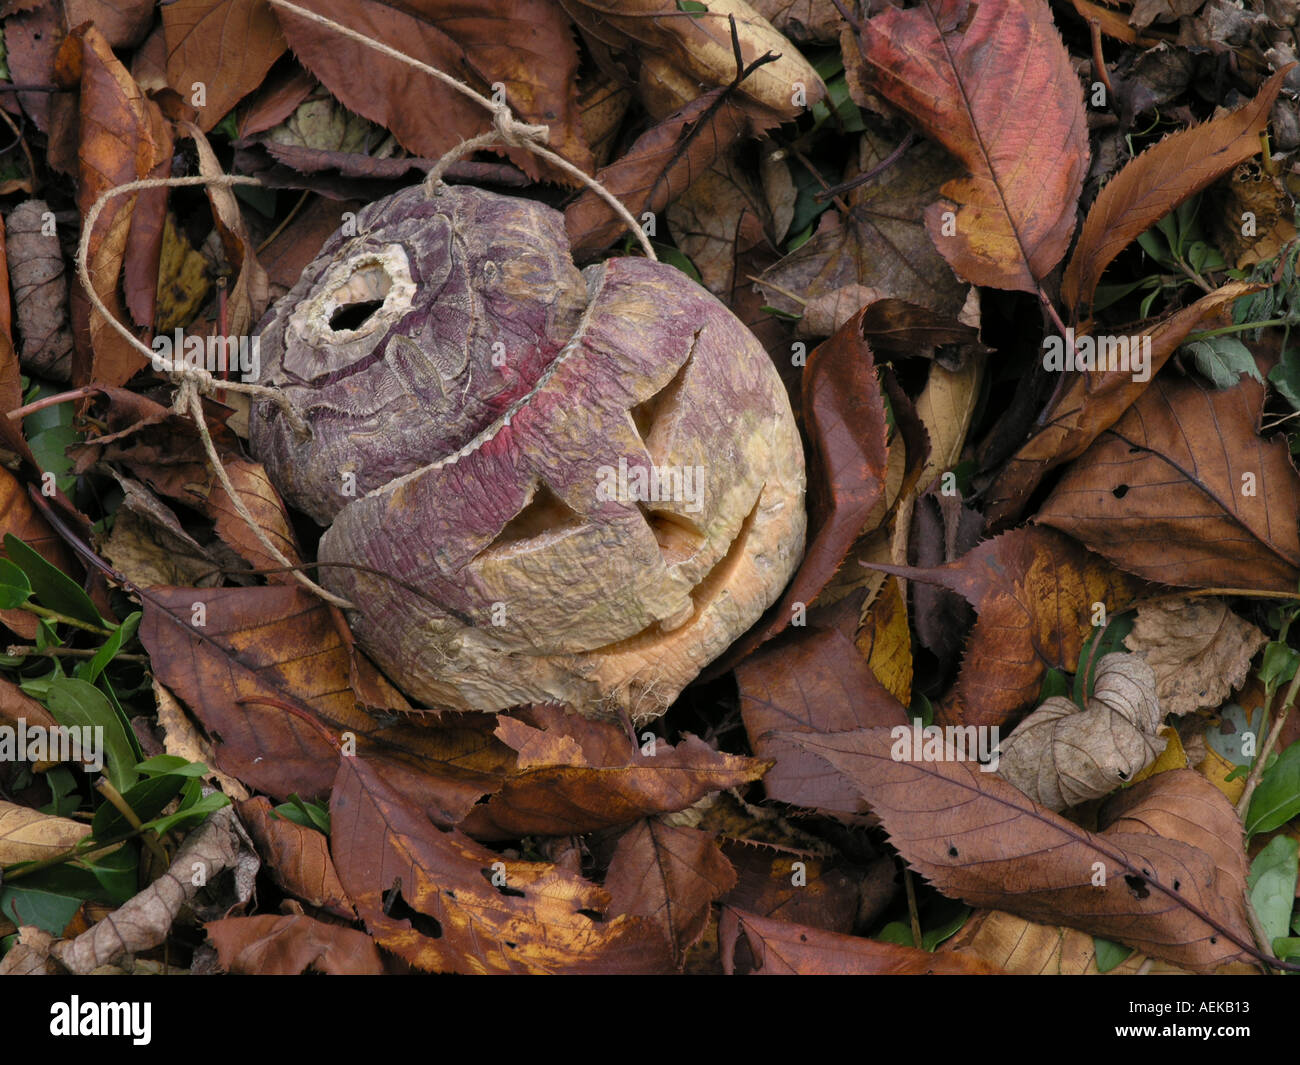 Halloween turnip or swede lantern in a pile of leaves Stock Photo